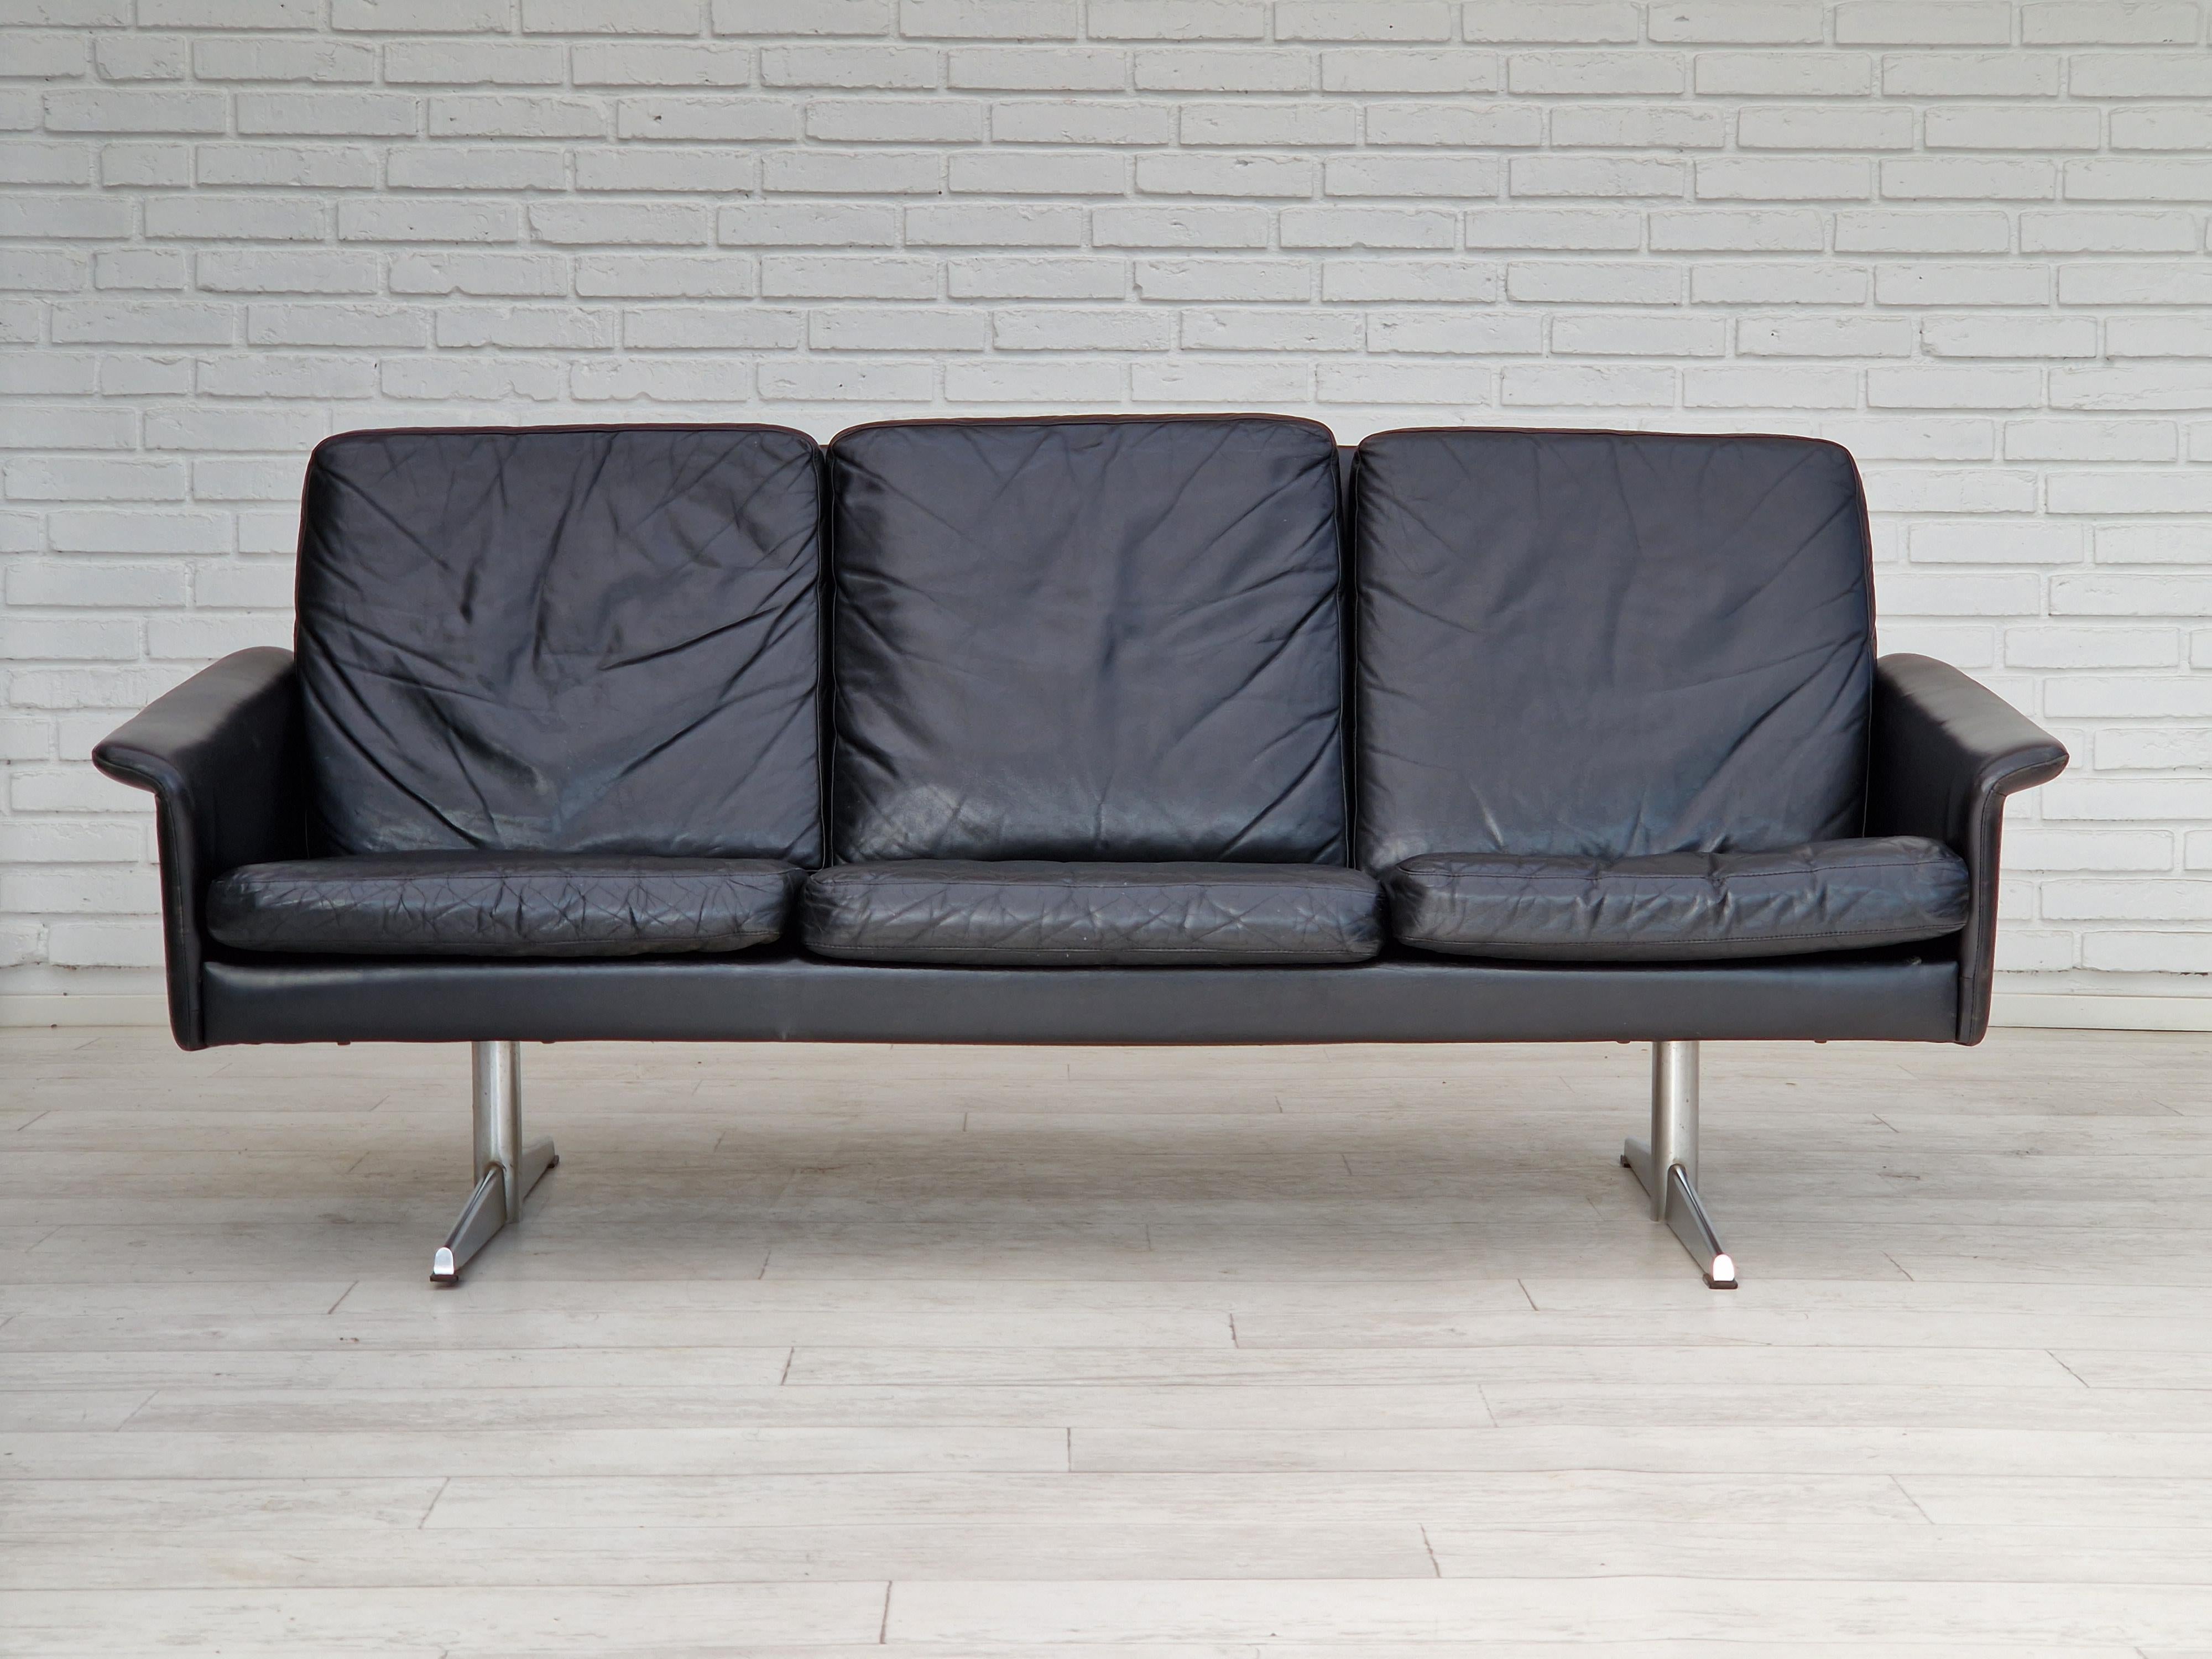 1970s, Danish design by Georg Thams. 3 seater sofa, original black leather in very good condition: no smells and no stains. Legs of chrome steel. Loose cushions. Made by Danish furniture manufacturer Vejen Møbelfabrik in about 1970.